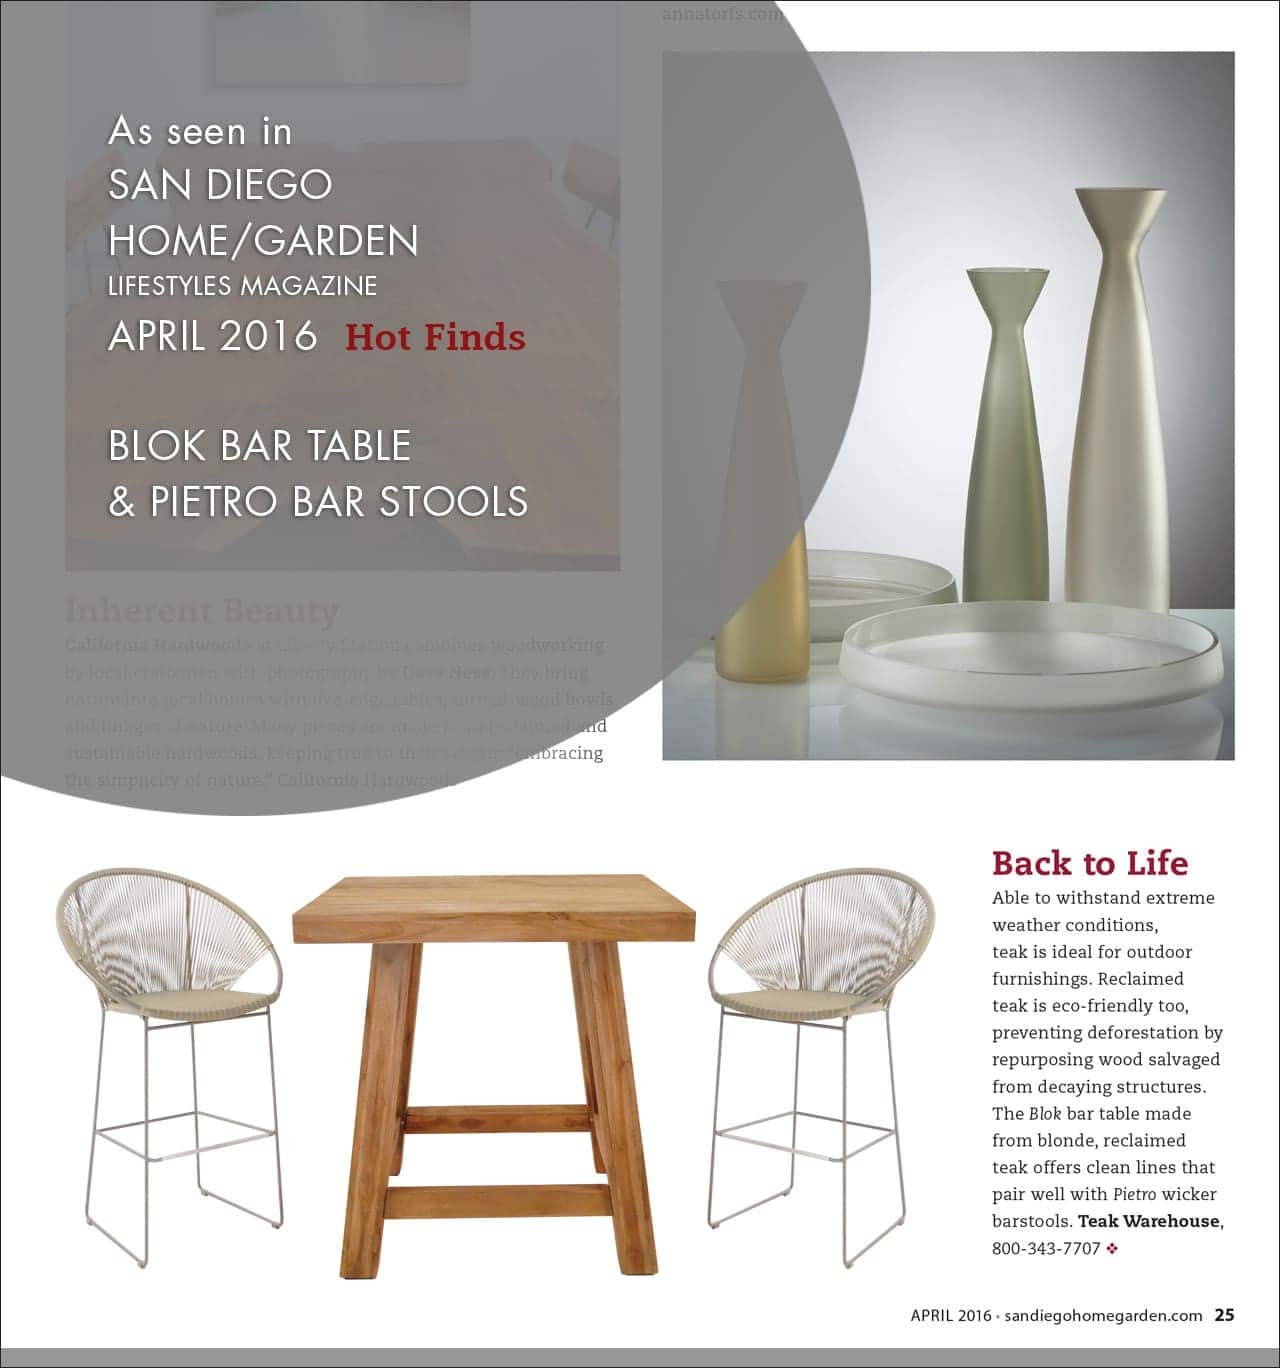 Blok Bar Table and Pietro Bar Stools featured in San Diego Home/Garden Lifestyles Magazine